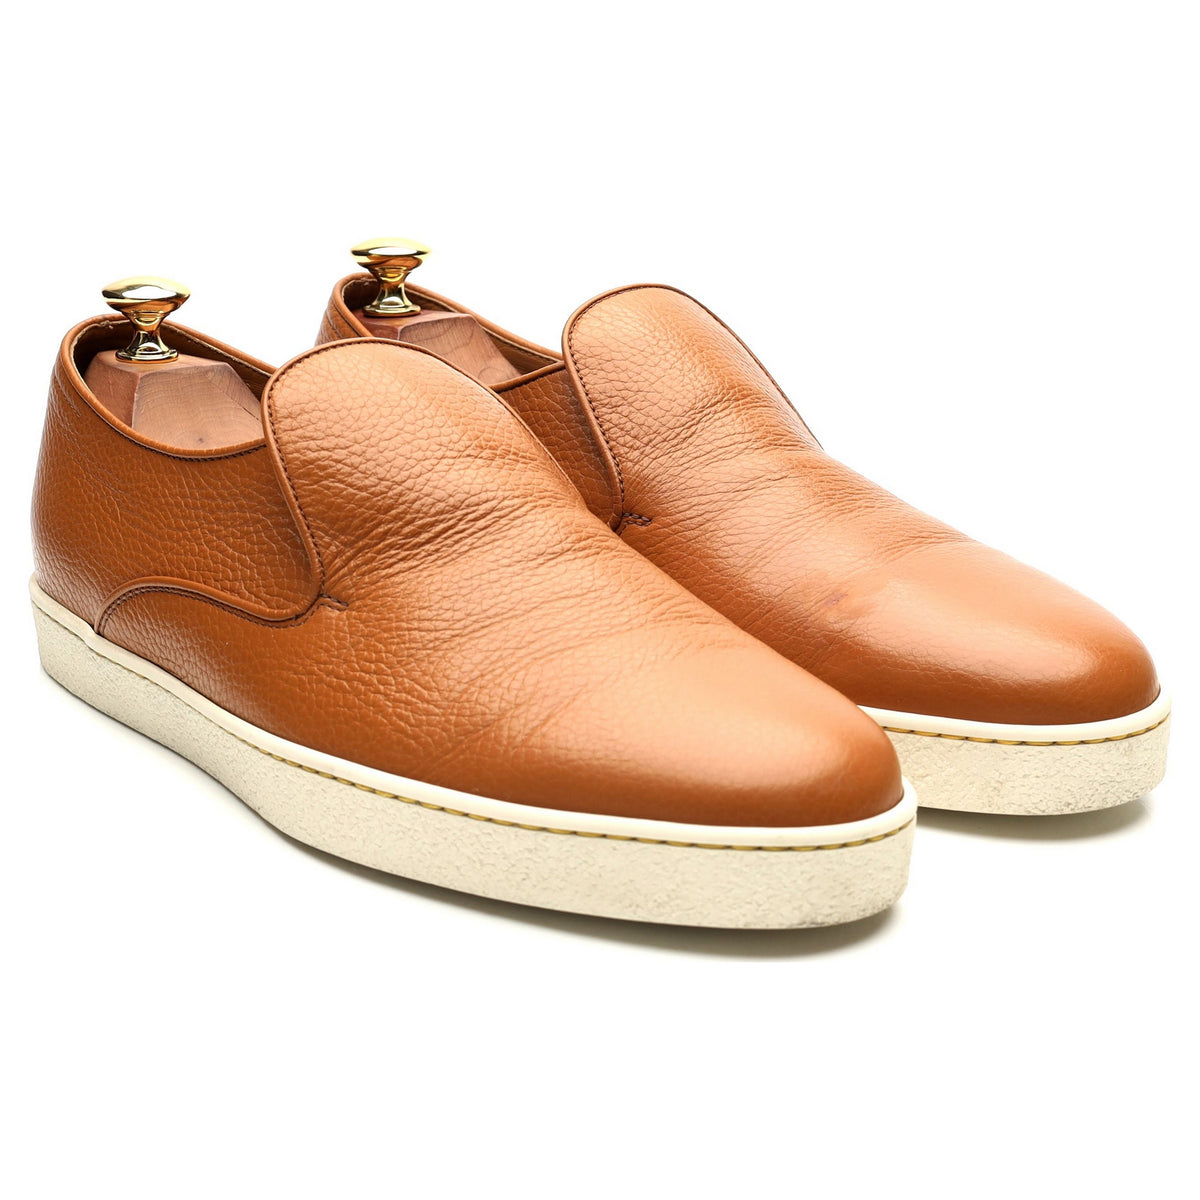 Tan Collection | Tan Shoes, bags & Loafers At ALDO Shoes, UK